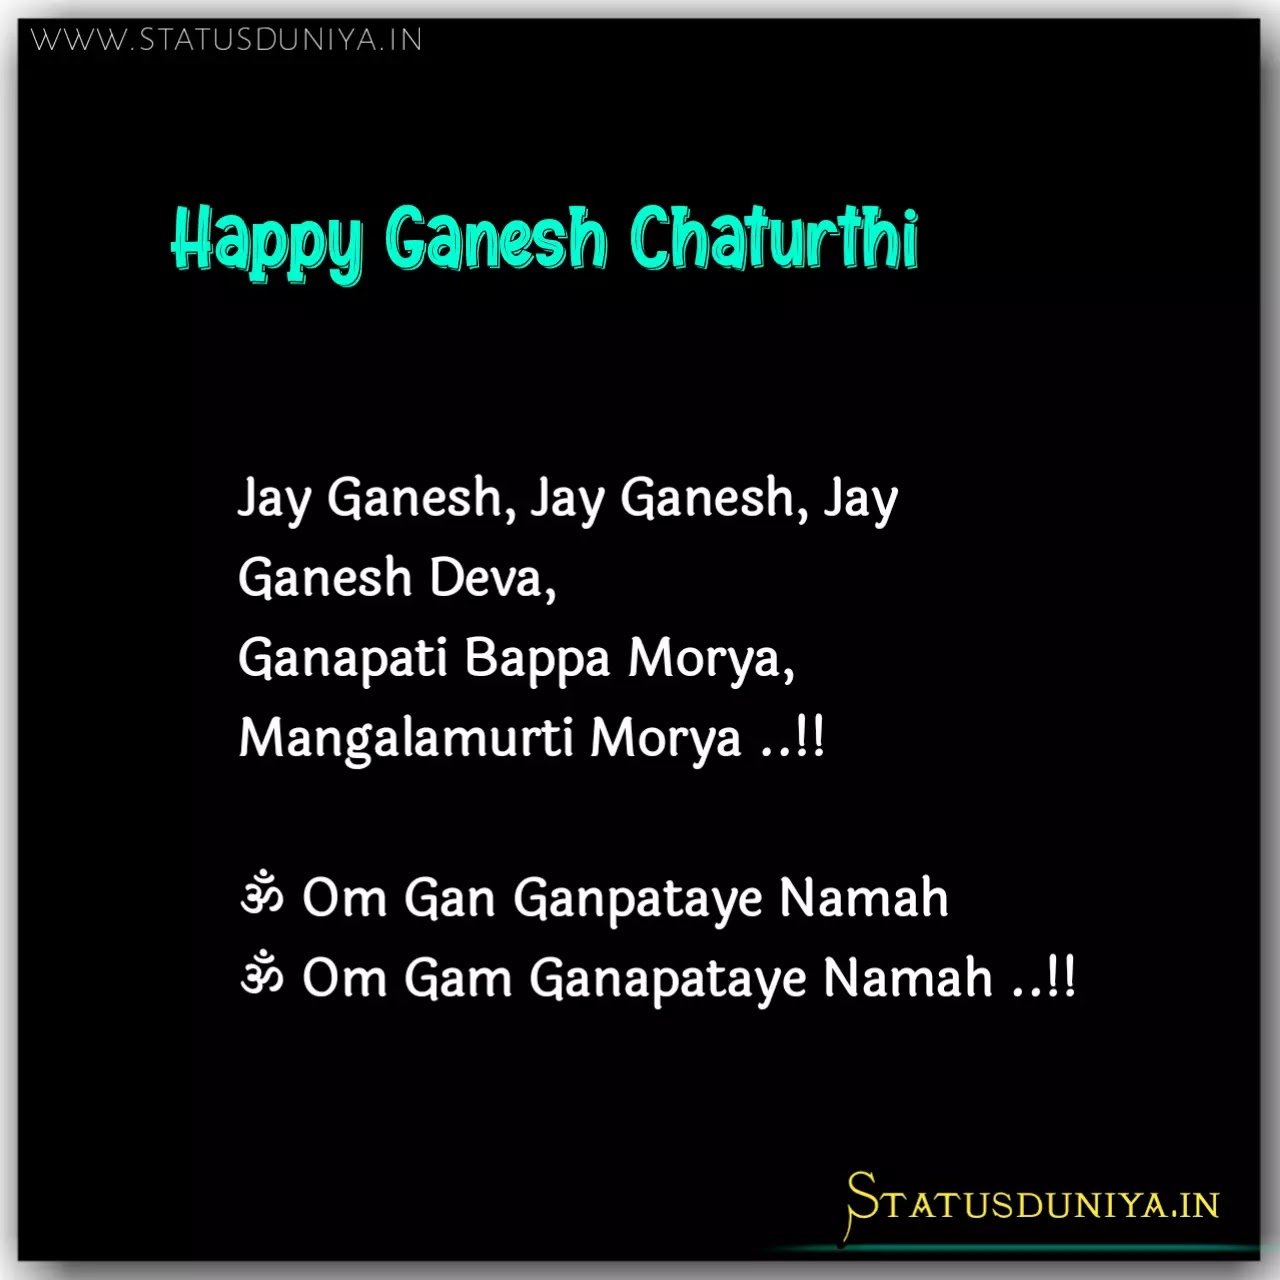 Ganesh Chaturthi Wishes In Hindi 2022 With Images
ganesh chaturthi 2022 wishes in hindi
ganesh chaturthi 2022 quotes in hindi
ganesh chaturthi wishes in hindi
ganesh chaturthi greetings in hindi